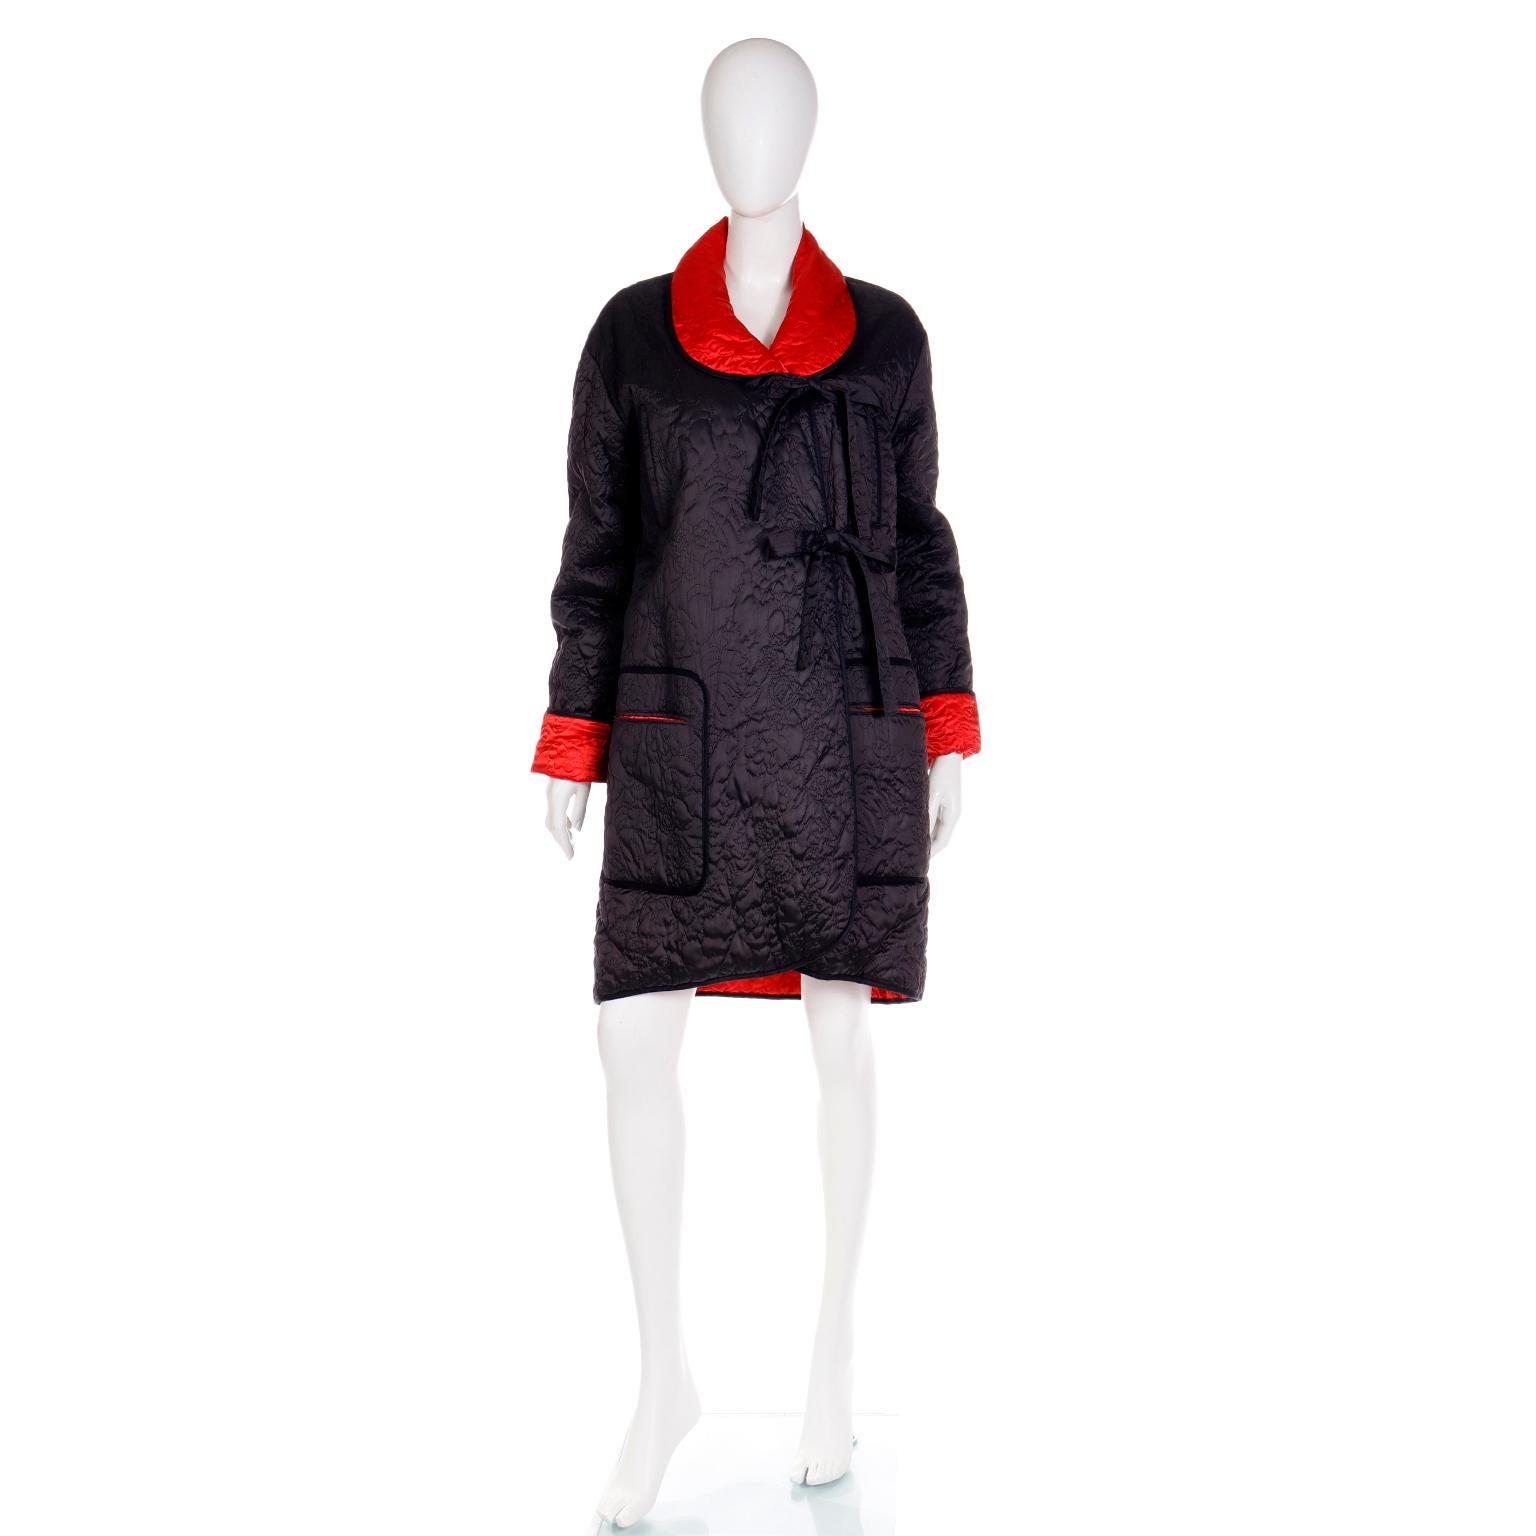 This is vintage Sonia Rykiel reversible red and black quilted jacket with a hood. We love vintage Sonia Rykiel pieces and she was such an influential designer. She was the first designer to put seams on the outside of garments, now known as